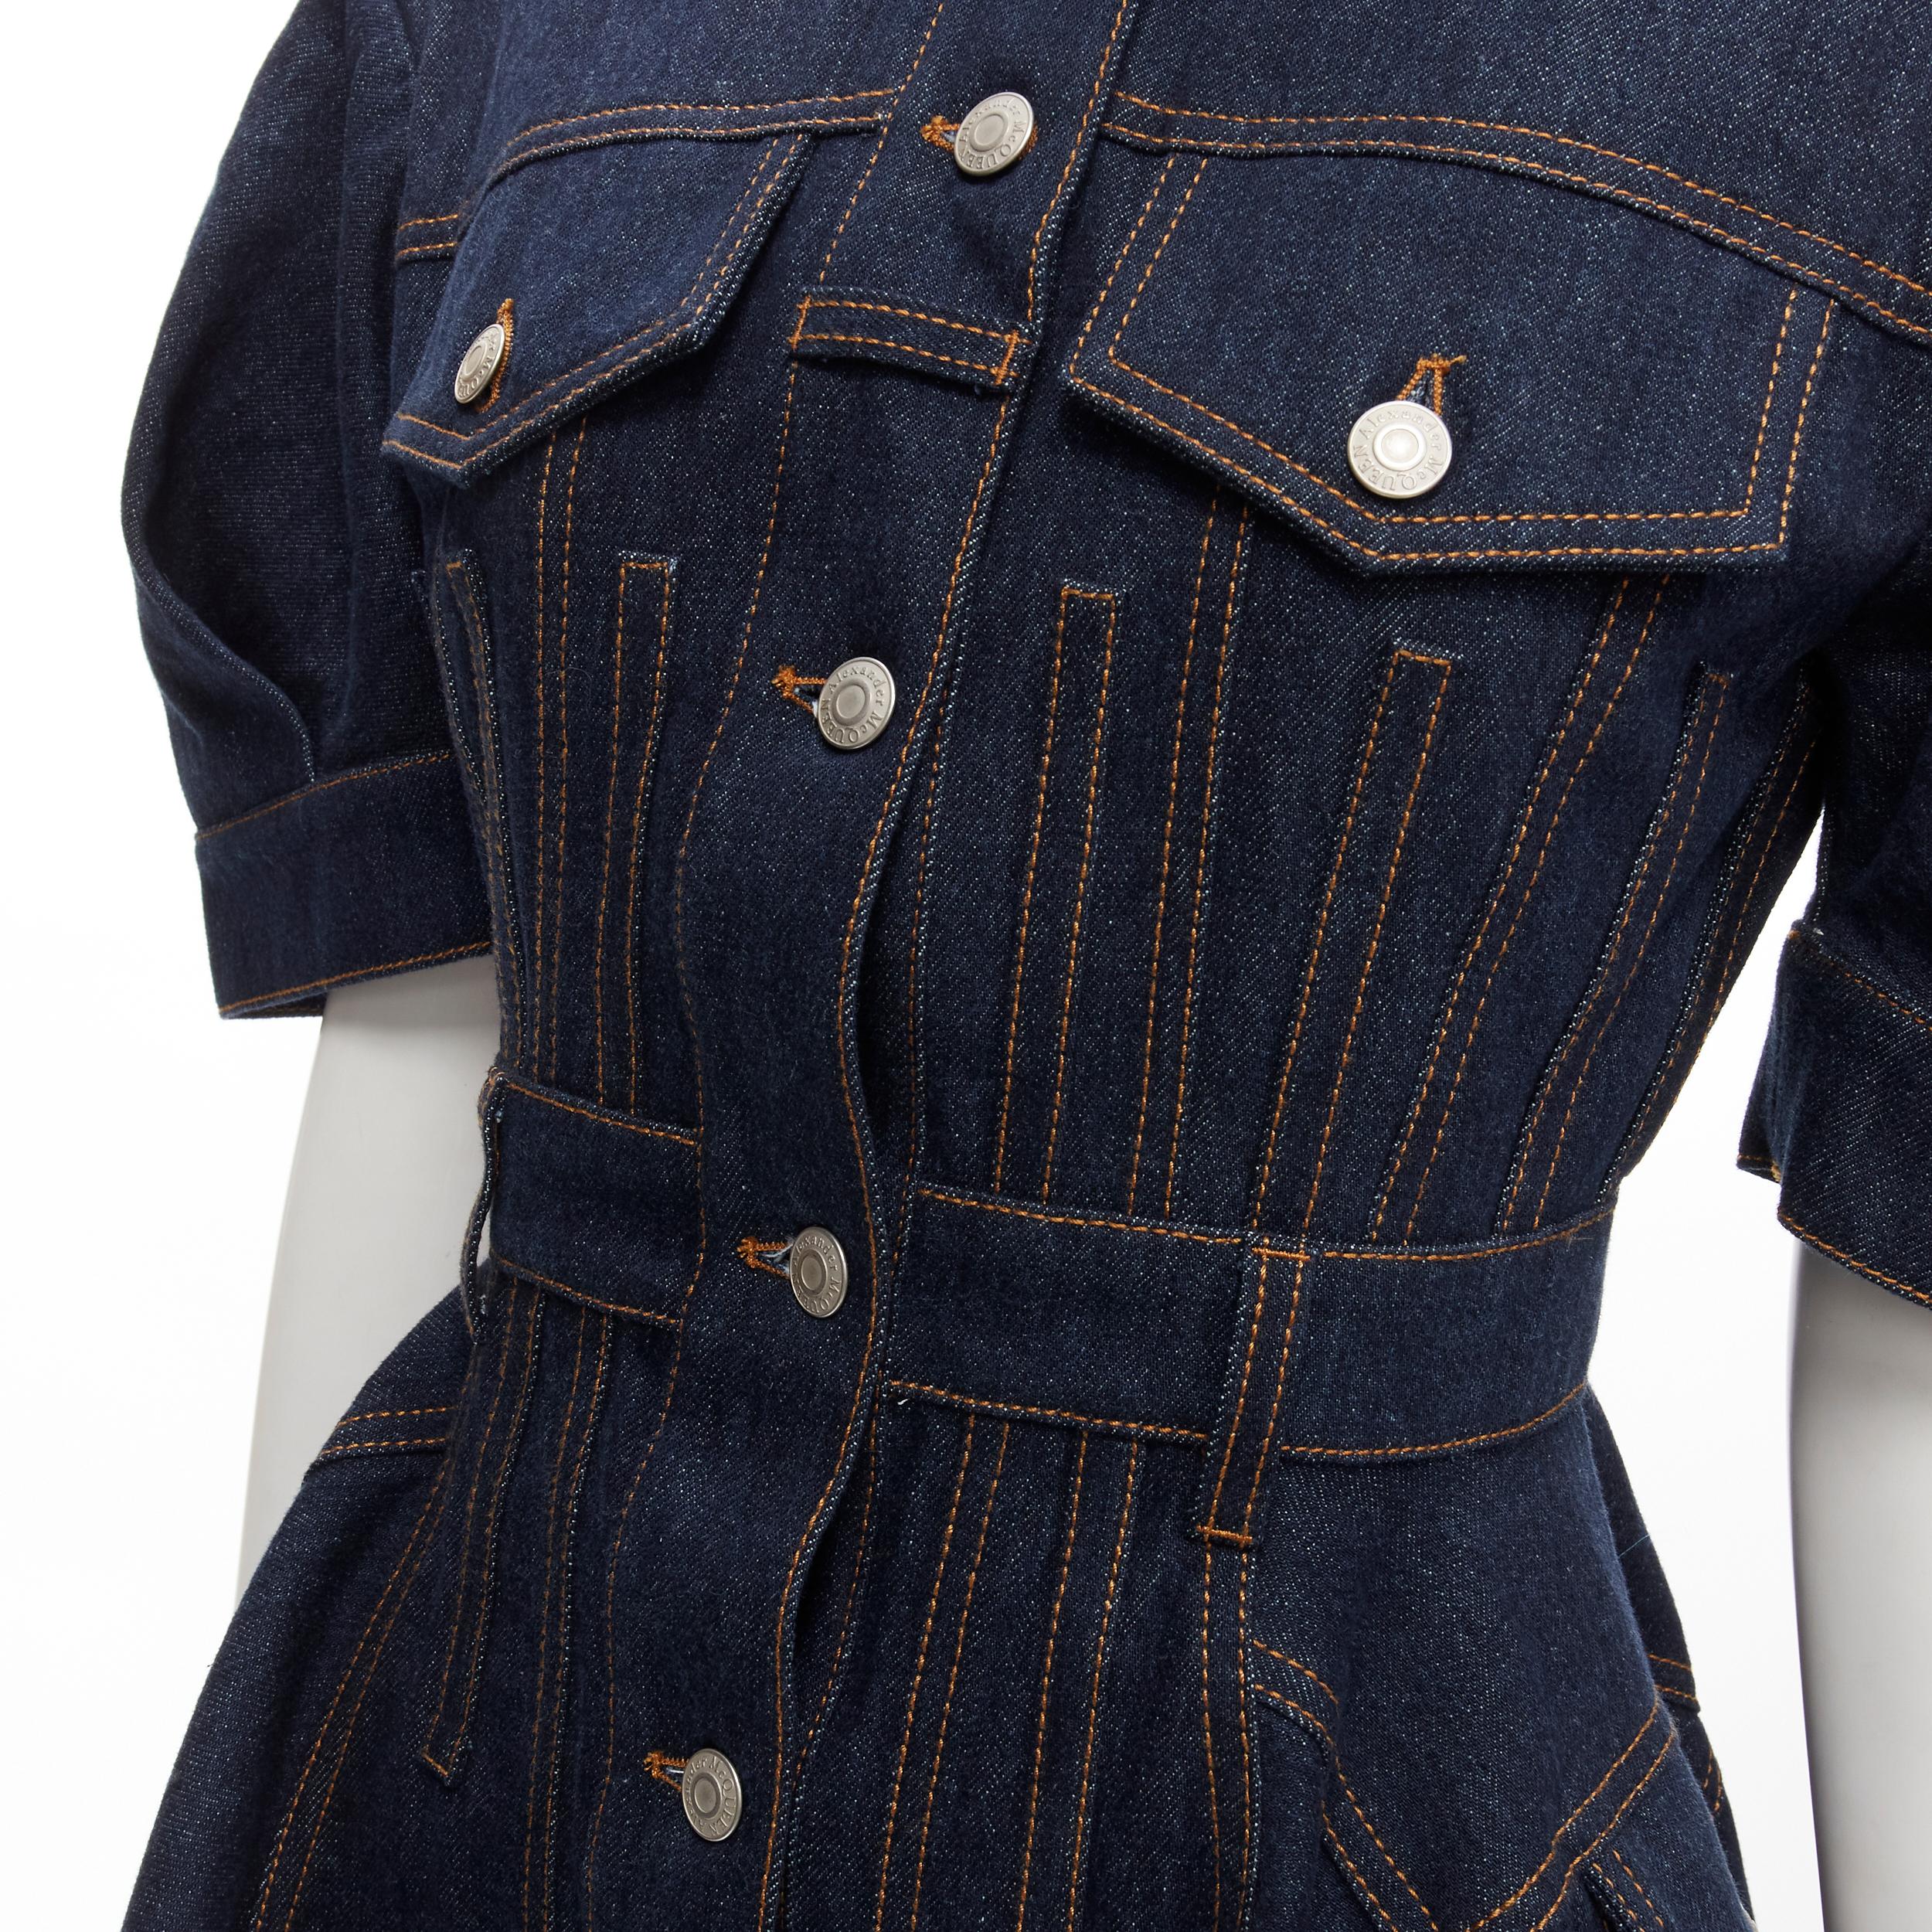 ALEXANDER MCQUEEN 2022 indigo blue denim corset rounded sleeve dress IT38 XS
Brand: Alexander McQueen
Collection: 2021 
Material: Denim
Color: Blue
Pattern: Solid
Closure: Button
Extra Detail: Antique silver buttons. Corset fitted waist. High low